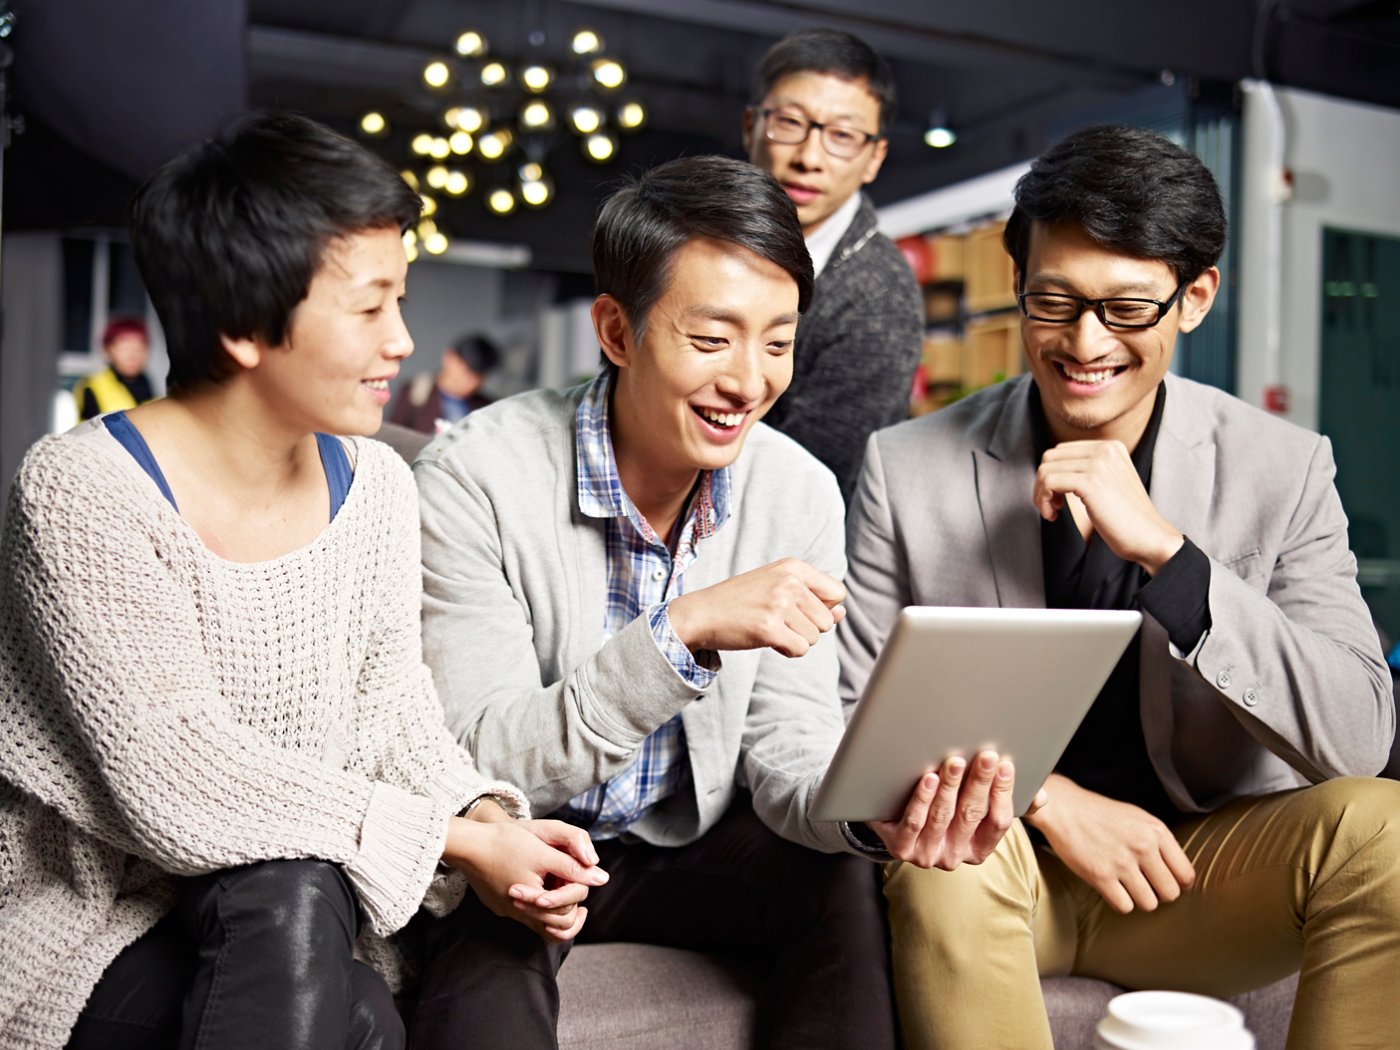 young asian businesspeople sitting in sofa looking at tablet computer, happy and smiling.